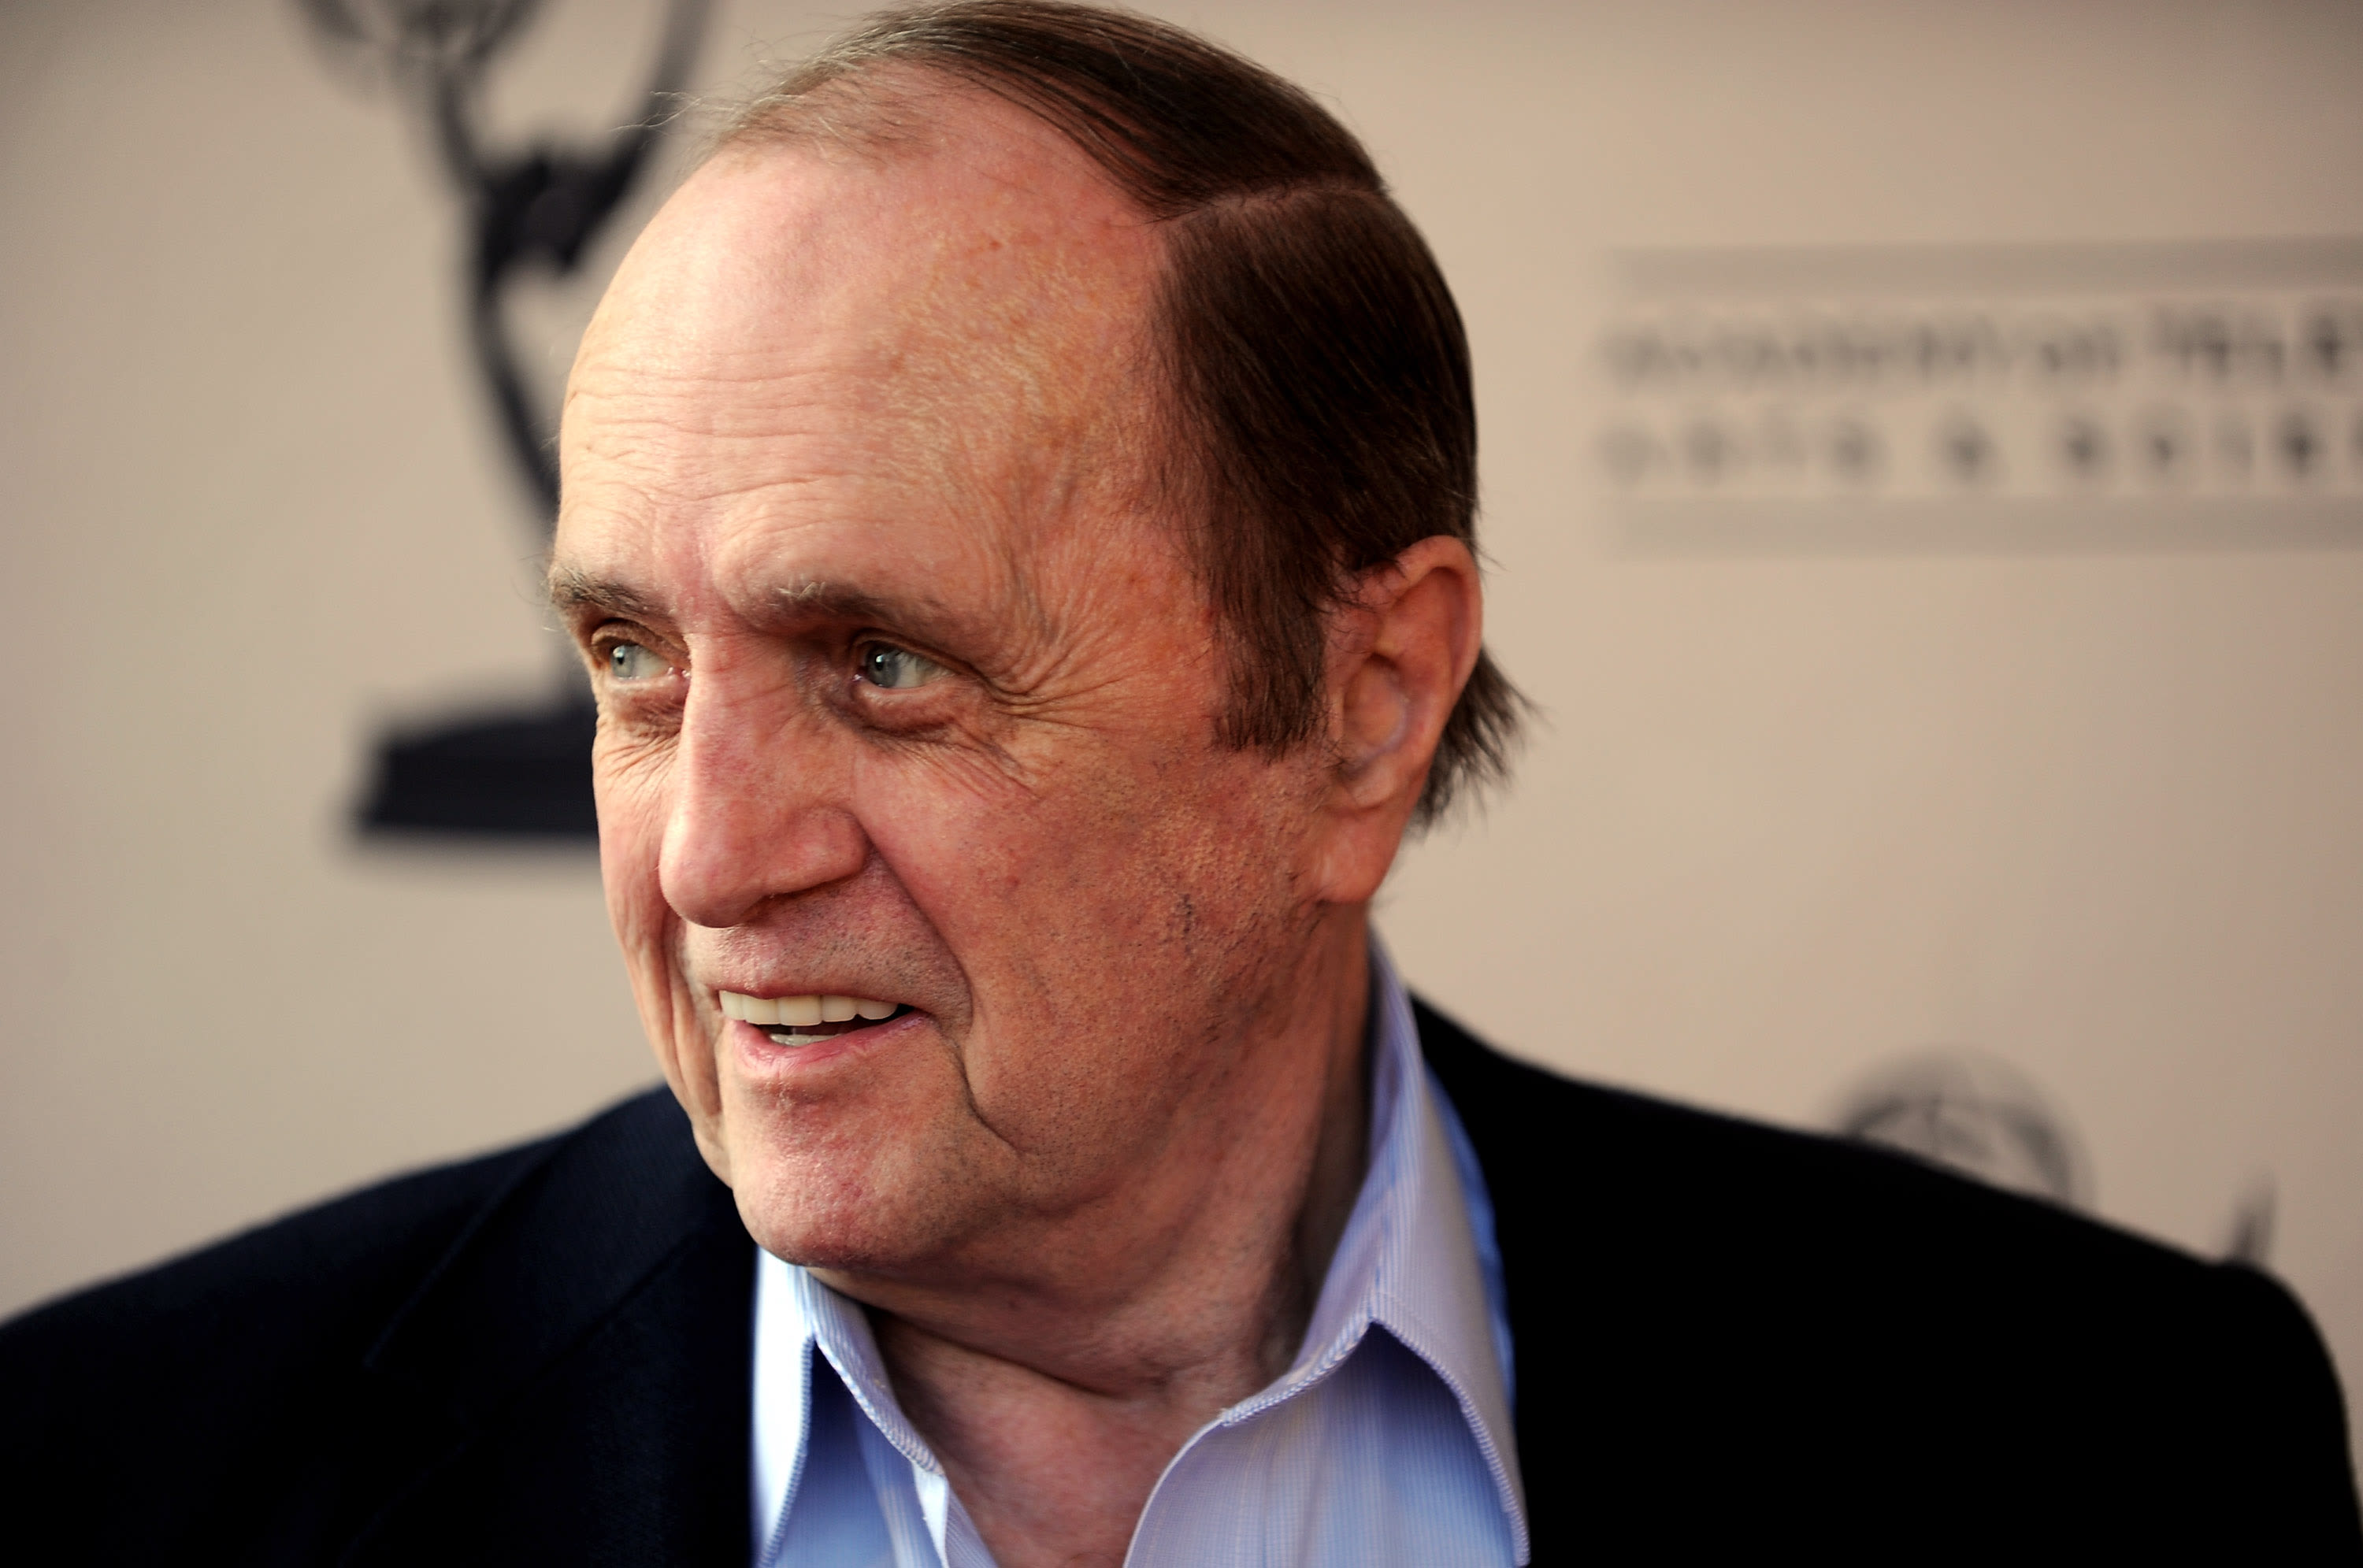 Bob Newhart, comedic legend who grew up on West Side, dies at 94